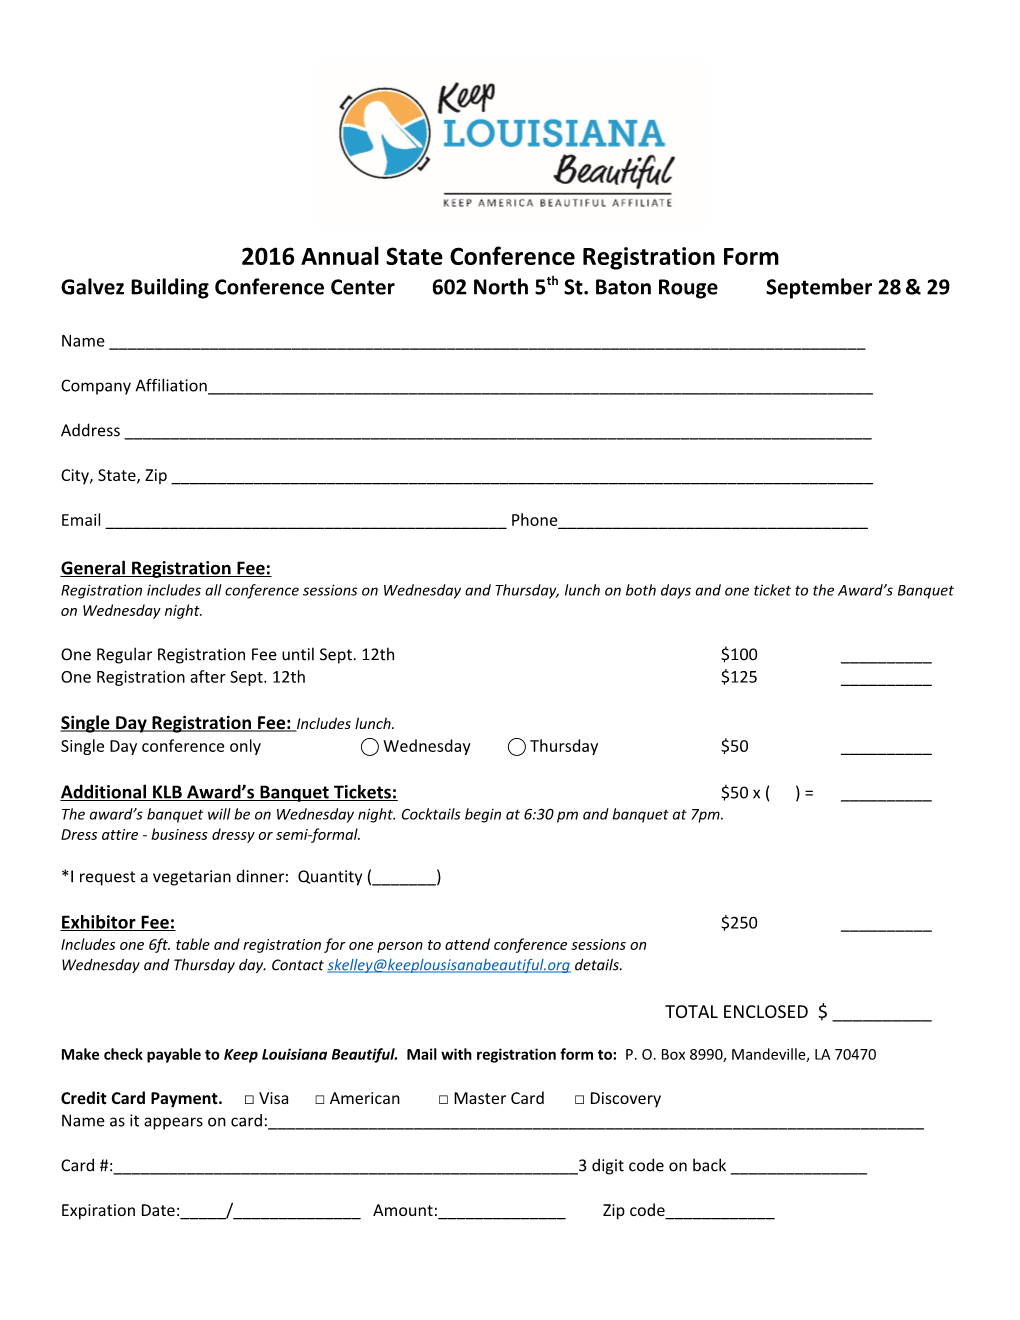 2016 Annual State Conference Registration Form